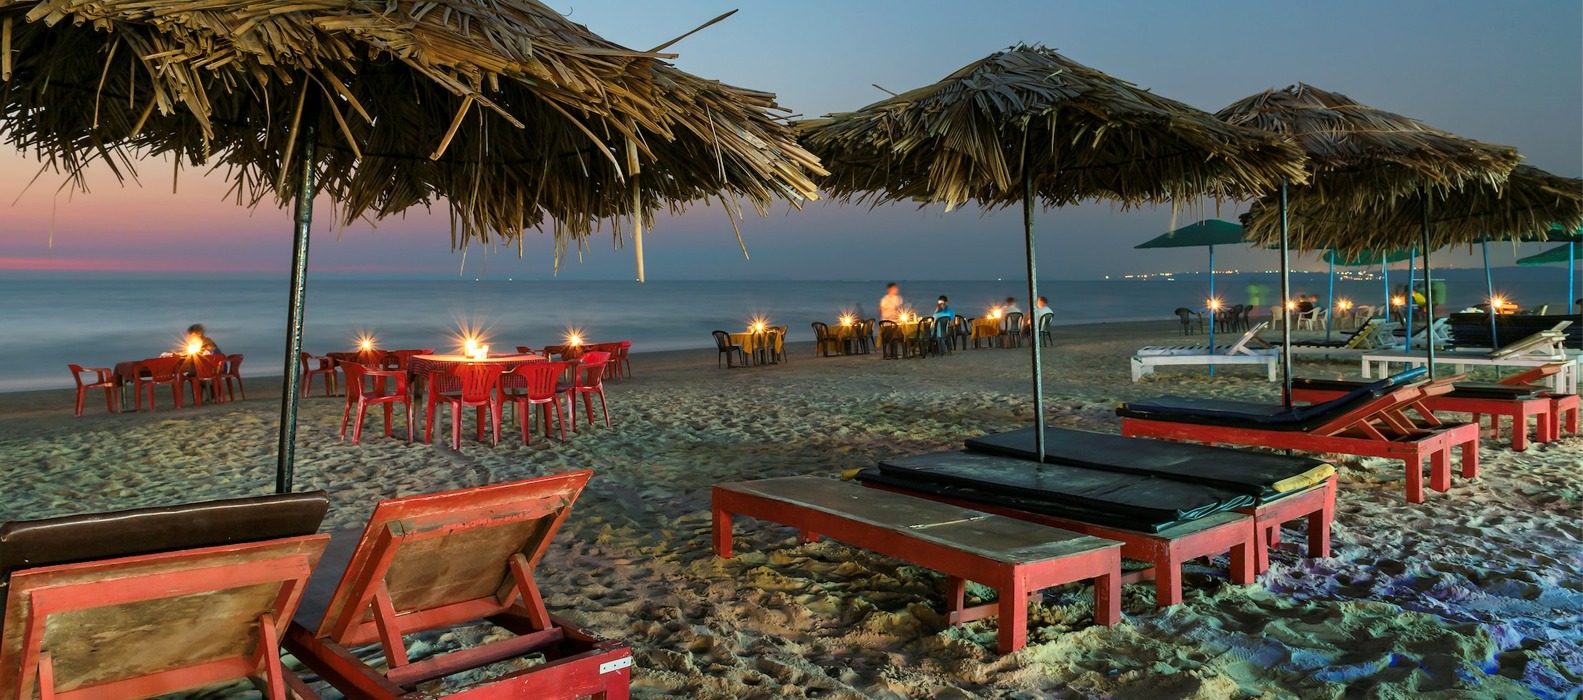 Goa Honeymoon Package - Top Places To Visit, Best Time, Reach